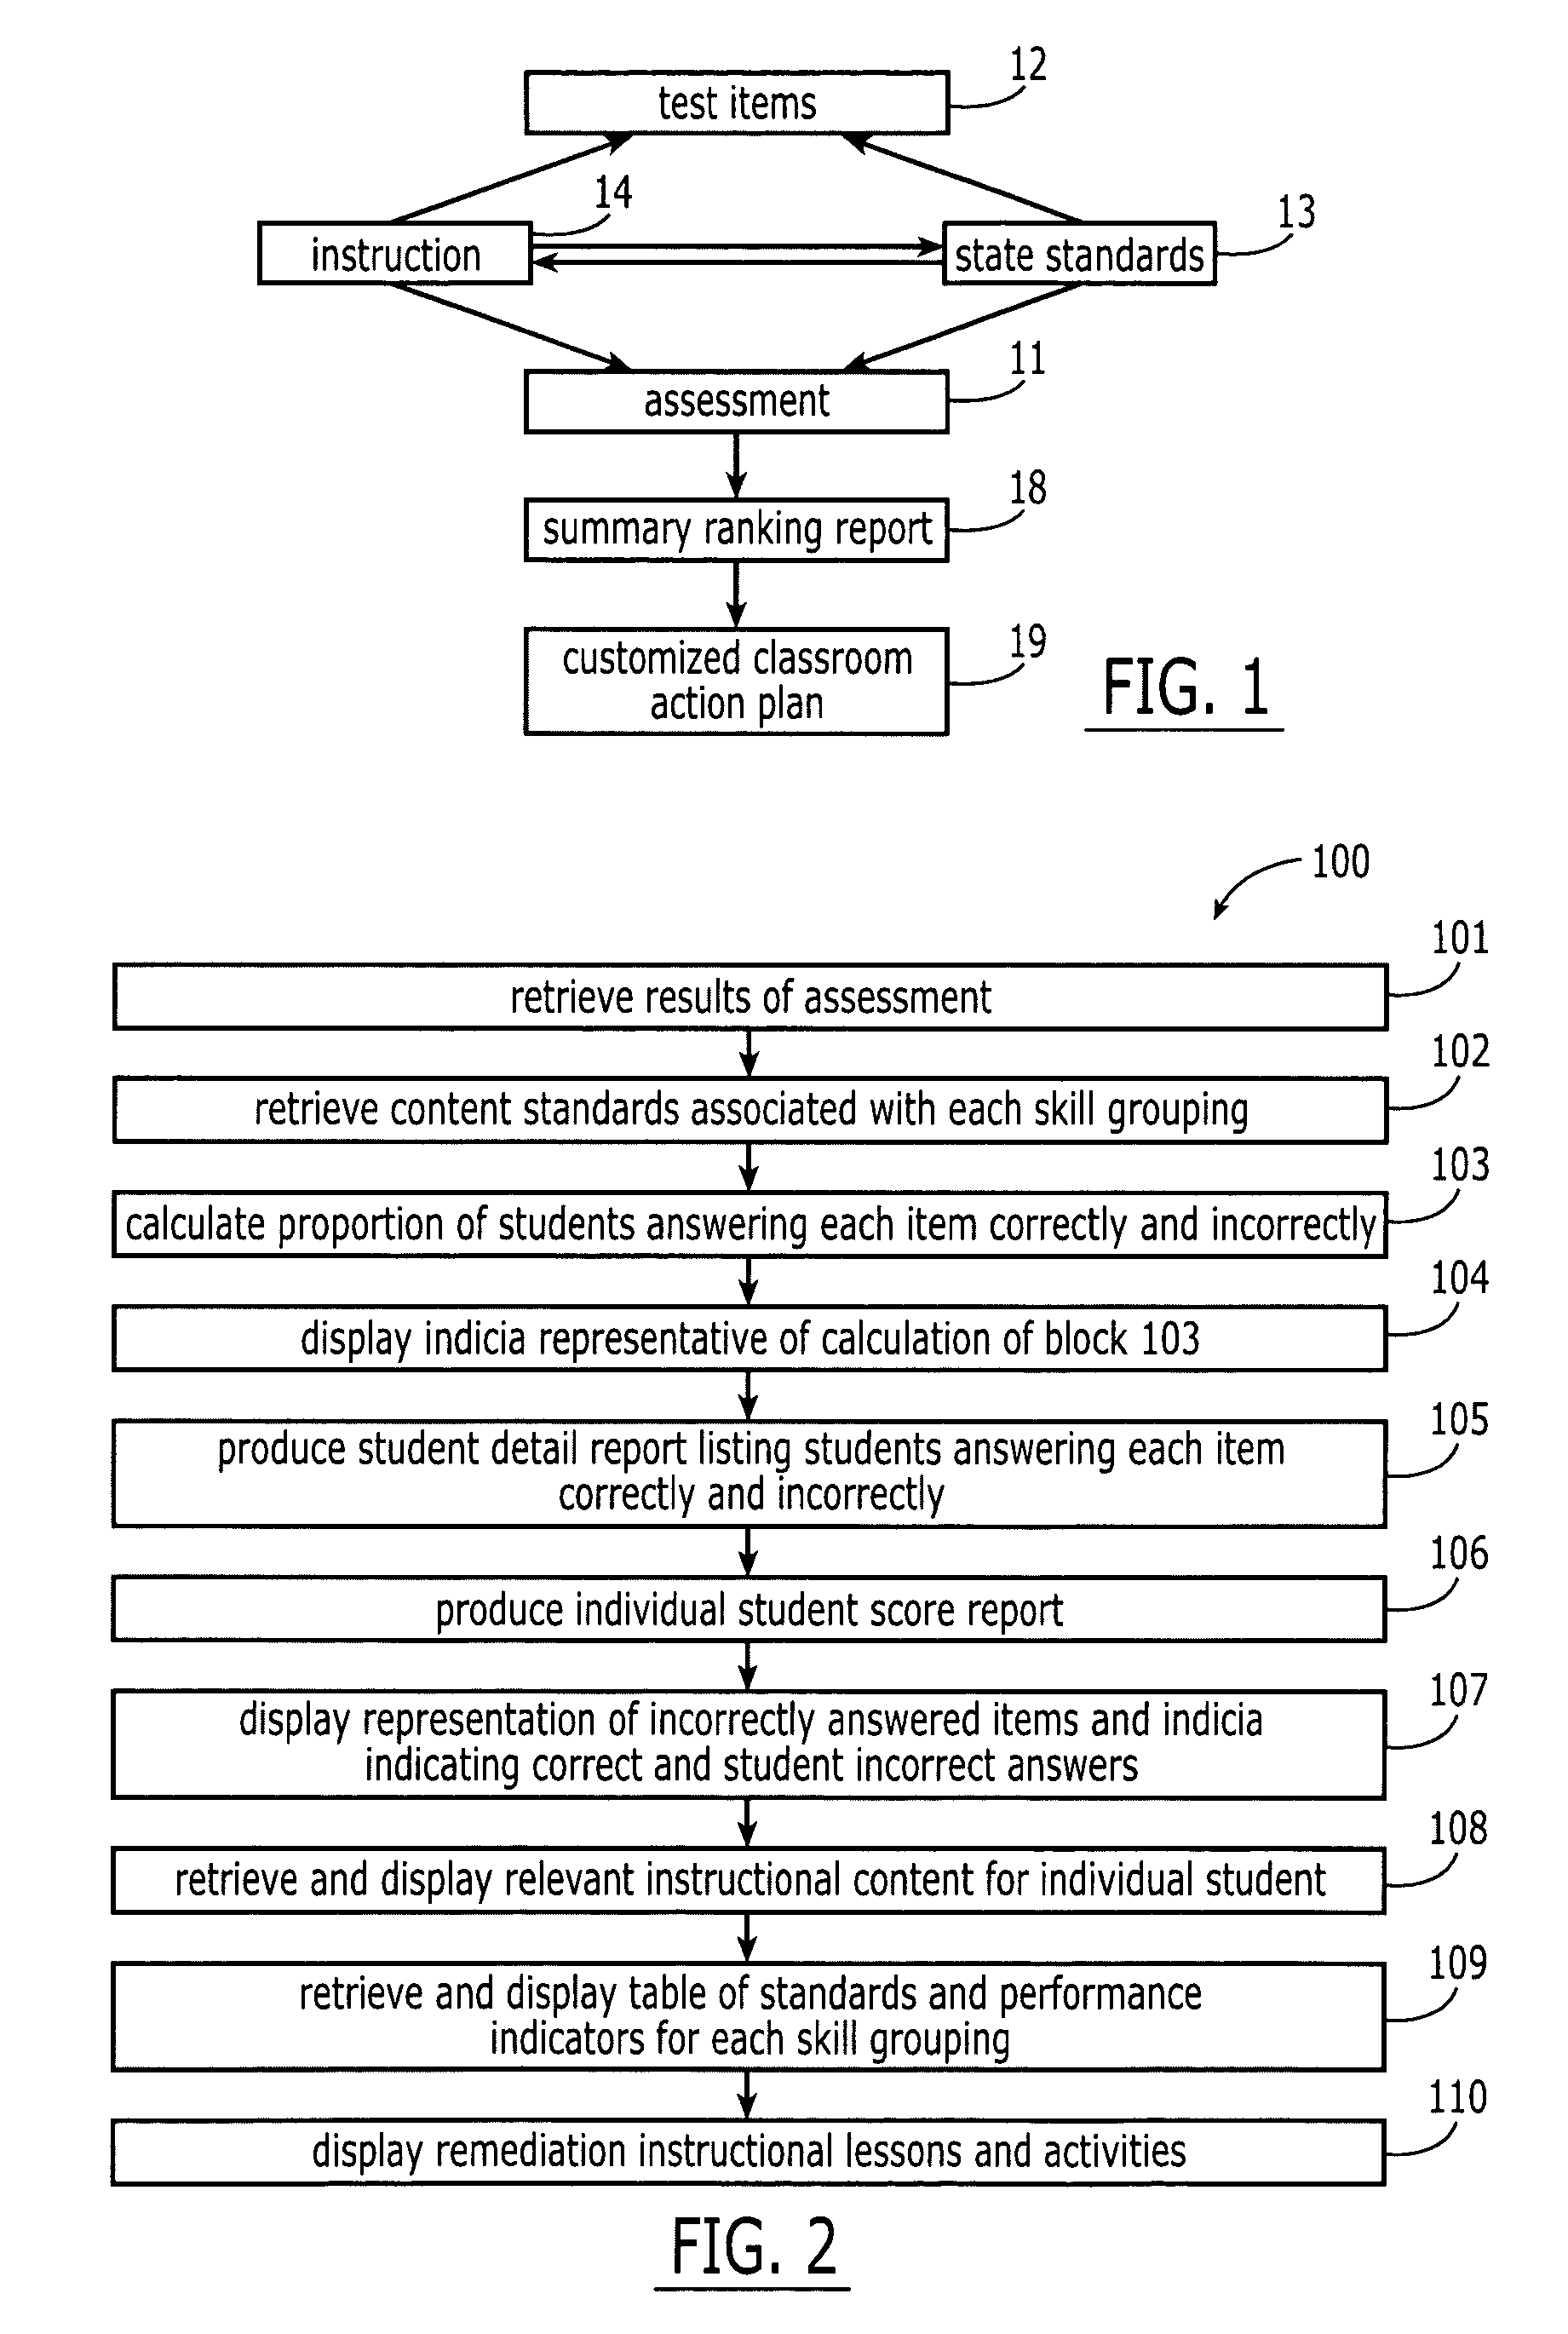 Electronic assessment summary and remedial action plan creation system and associated methods